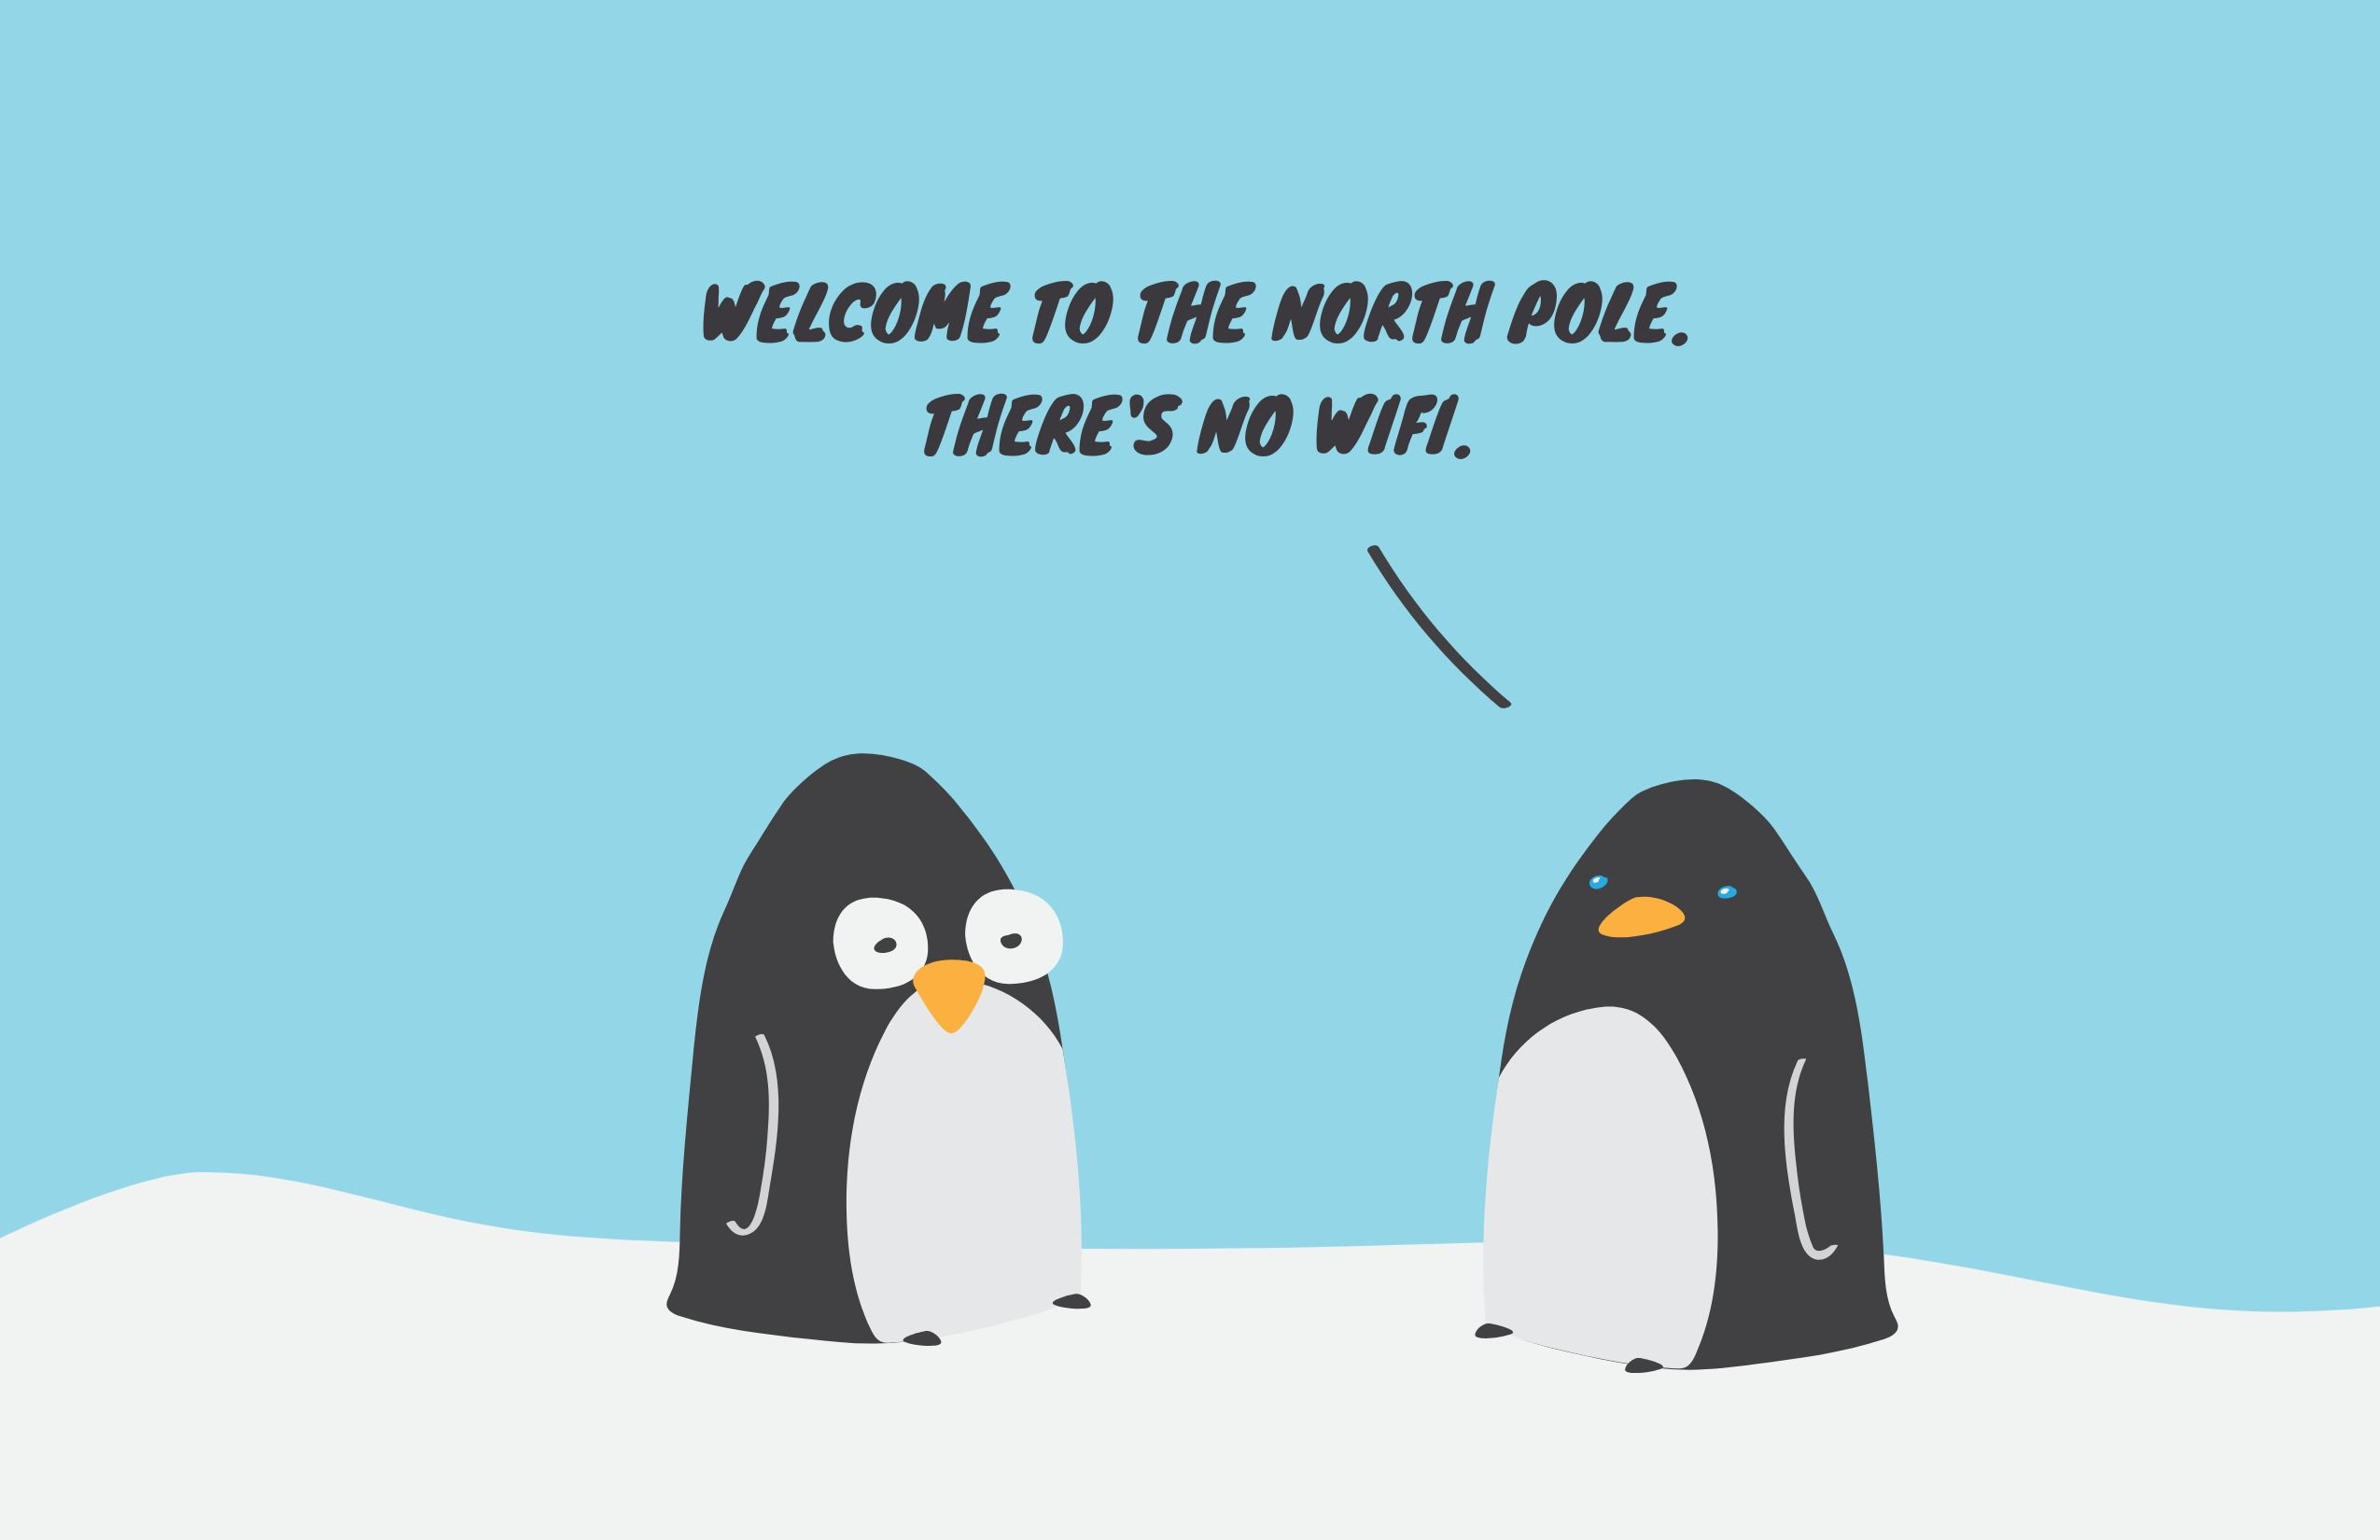 Penguins talking about wifi cartoon - 50 ideas and templates to use in your designs - Image